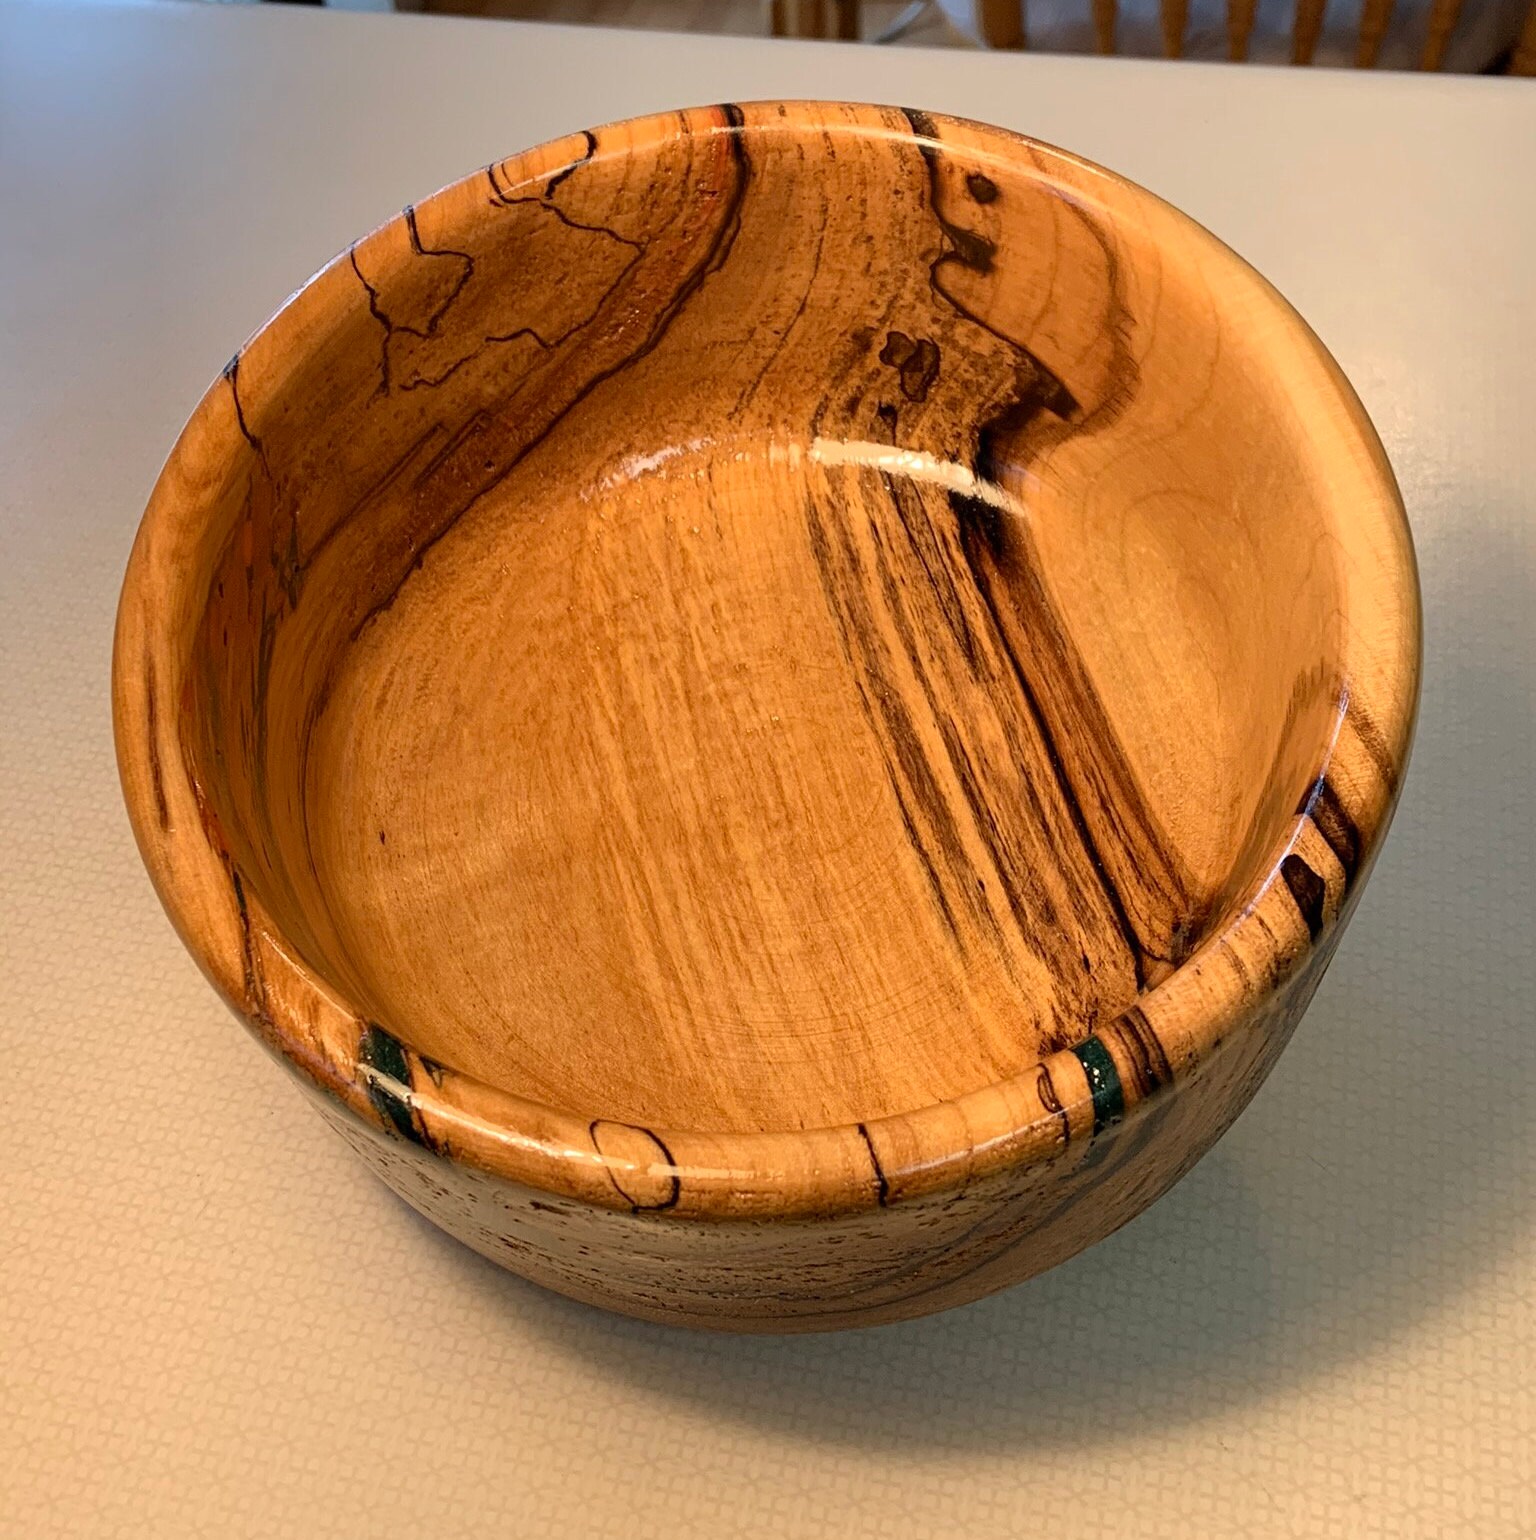 Spalted Maple Bowl With Red and Green Resin | Etsy